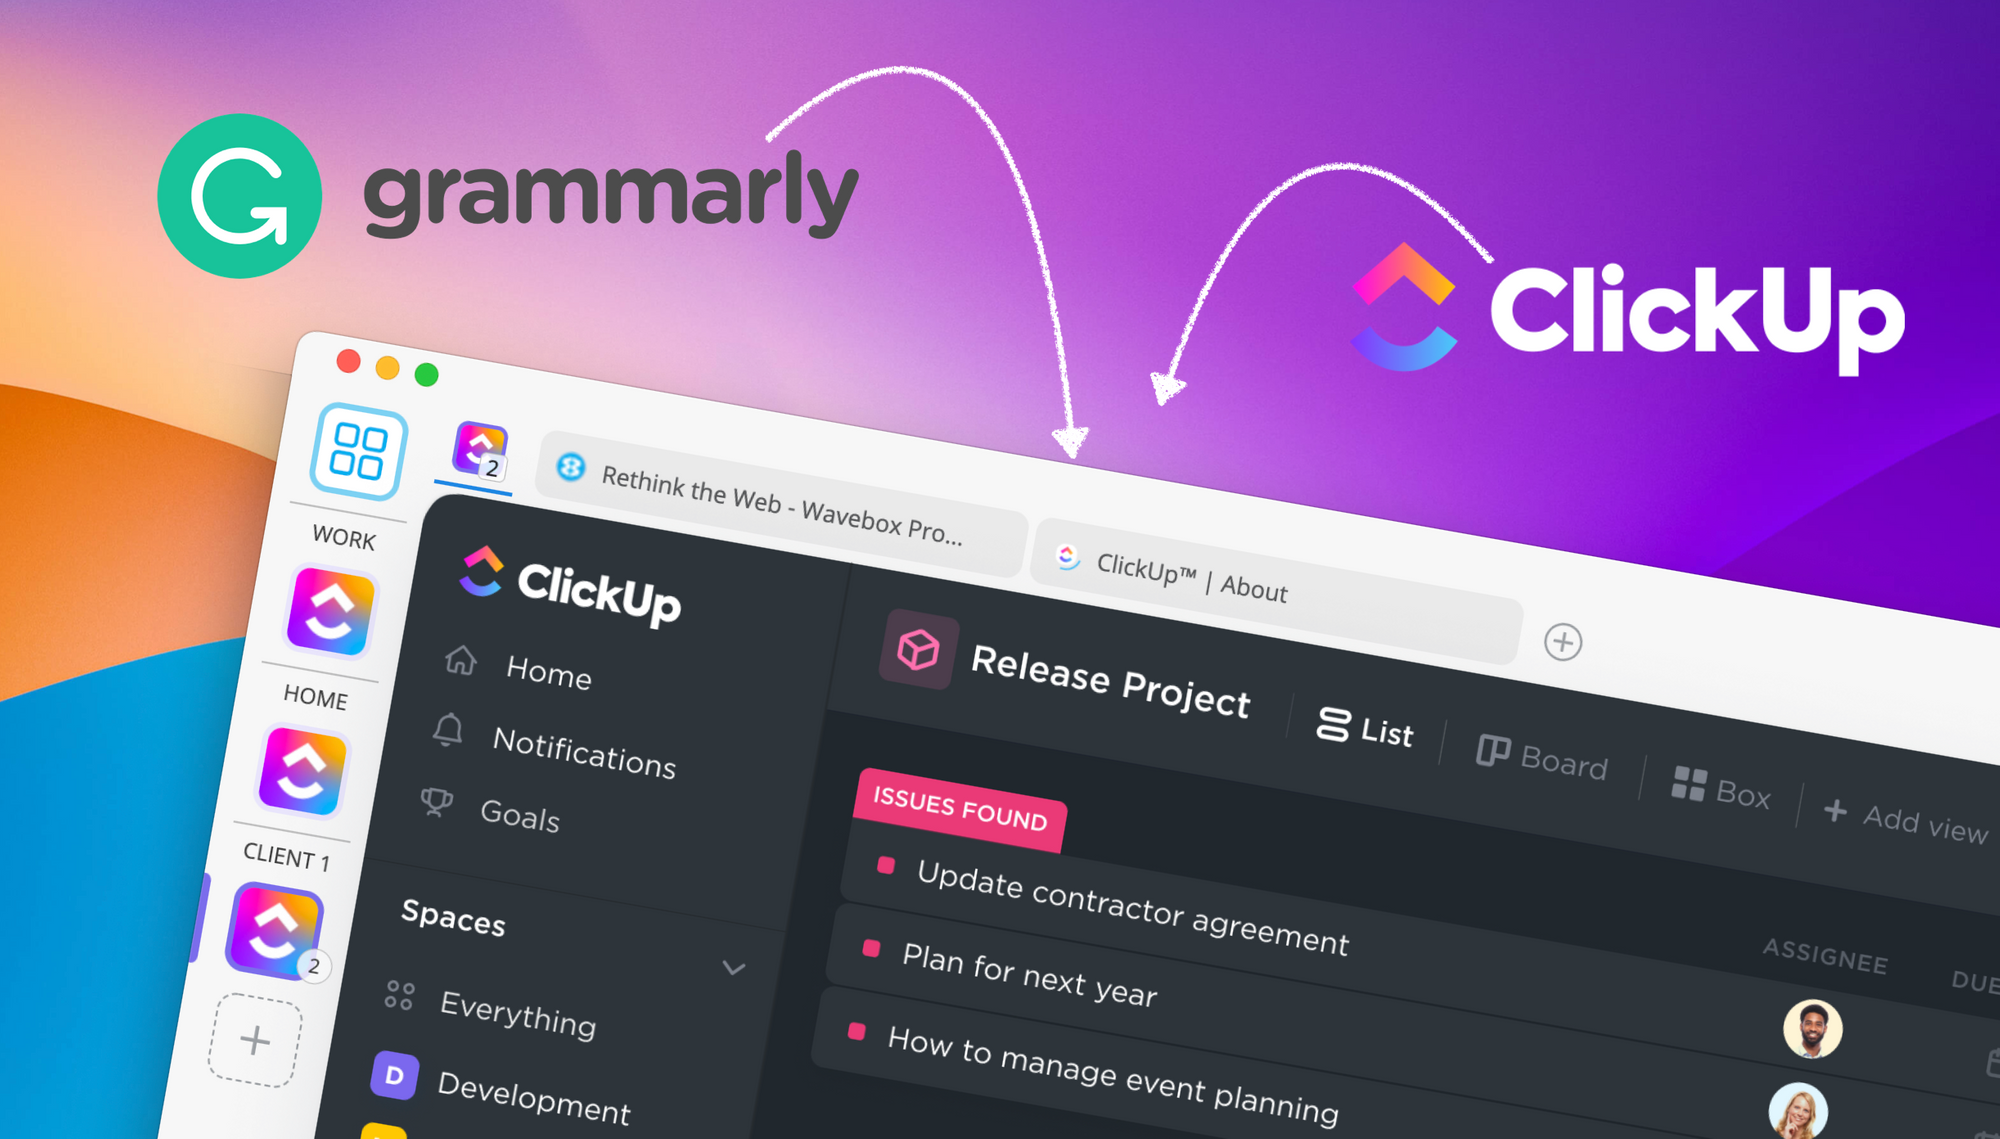 How to Install Grammarly in the ClickUp Desktop App?